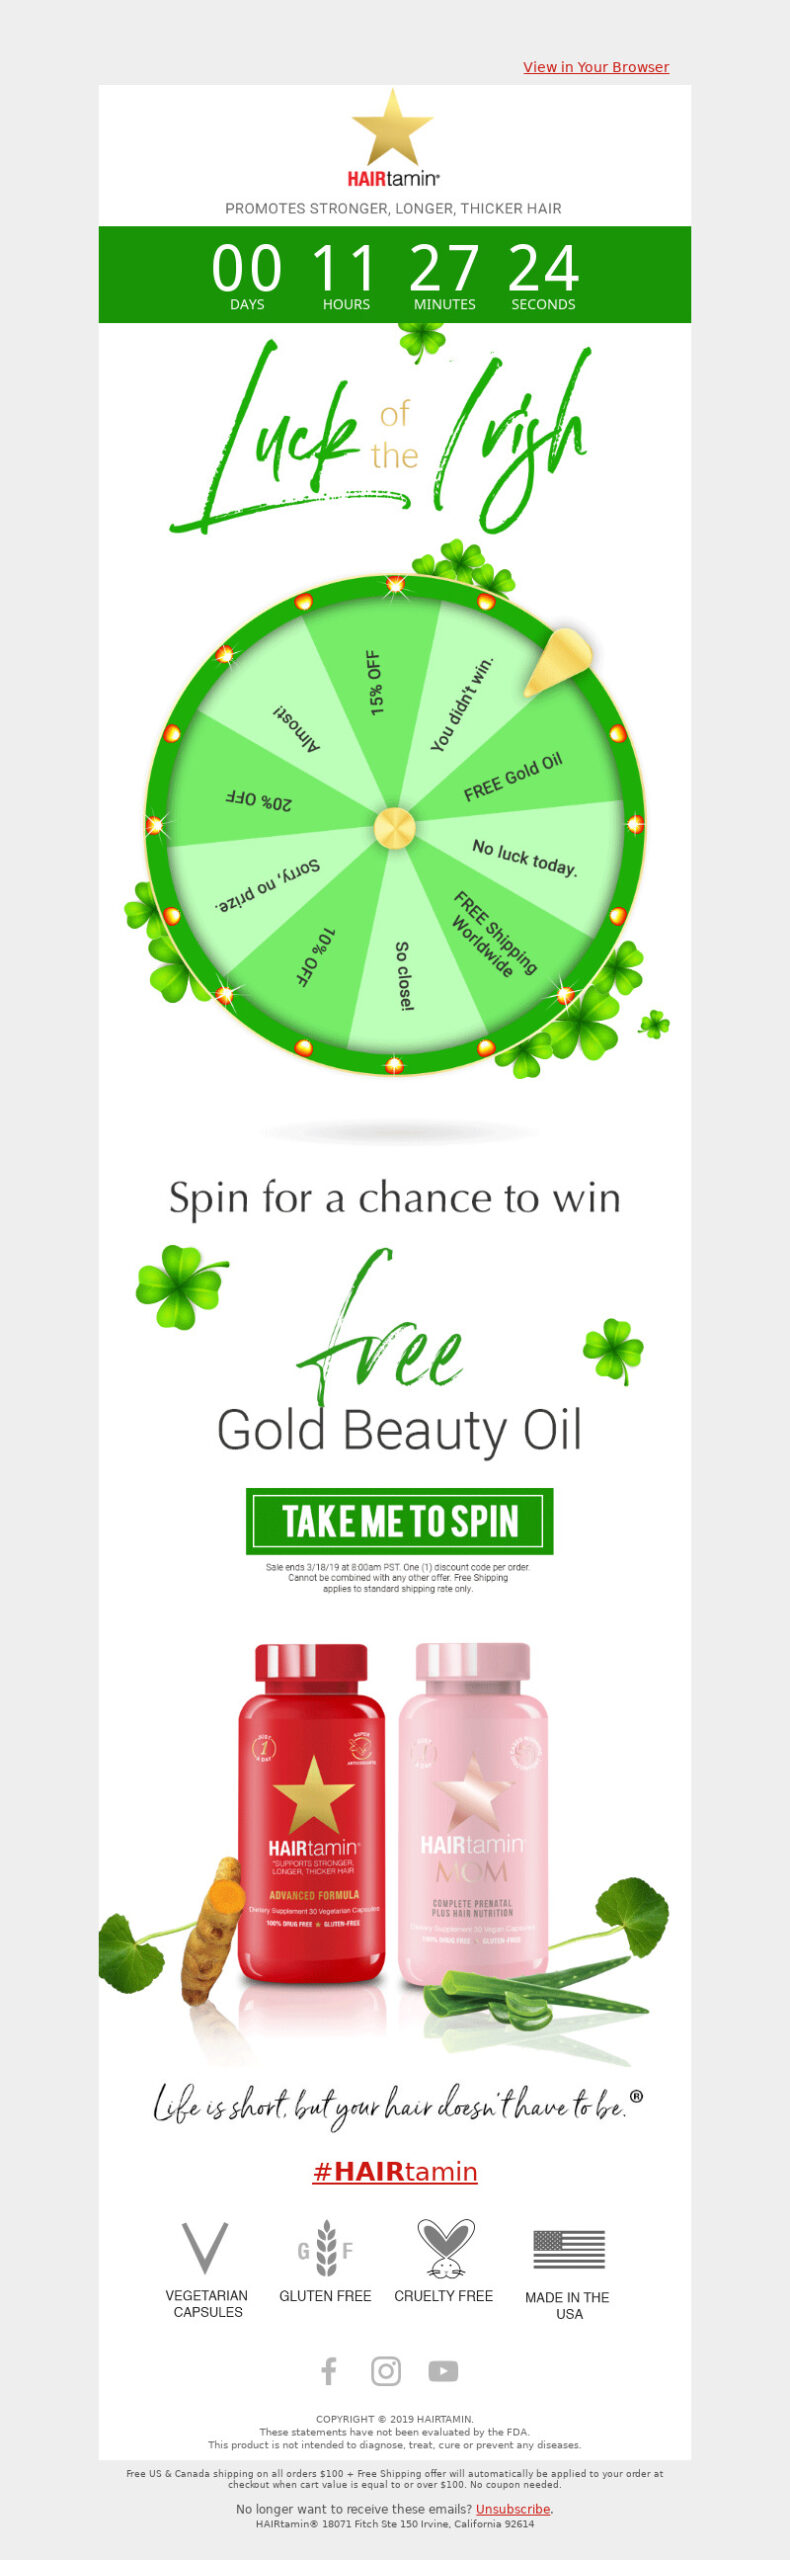 Hairtamin St. Patrick's Day gamification and countdown timer email promotion.